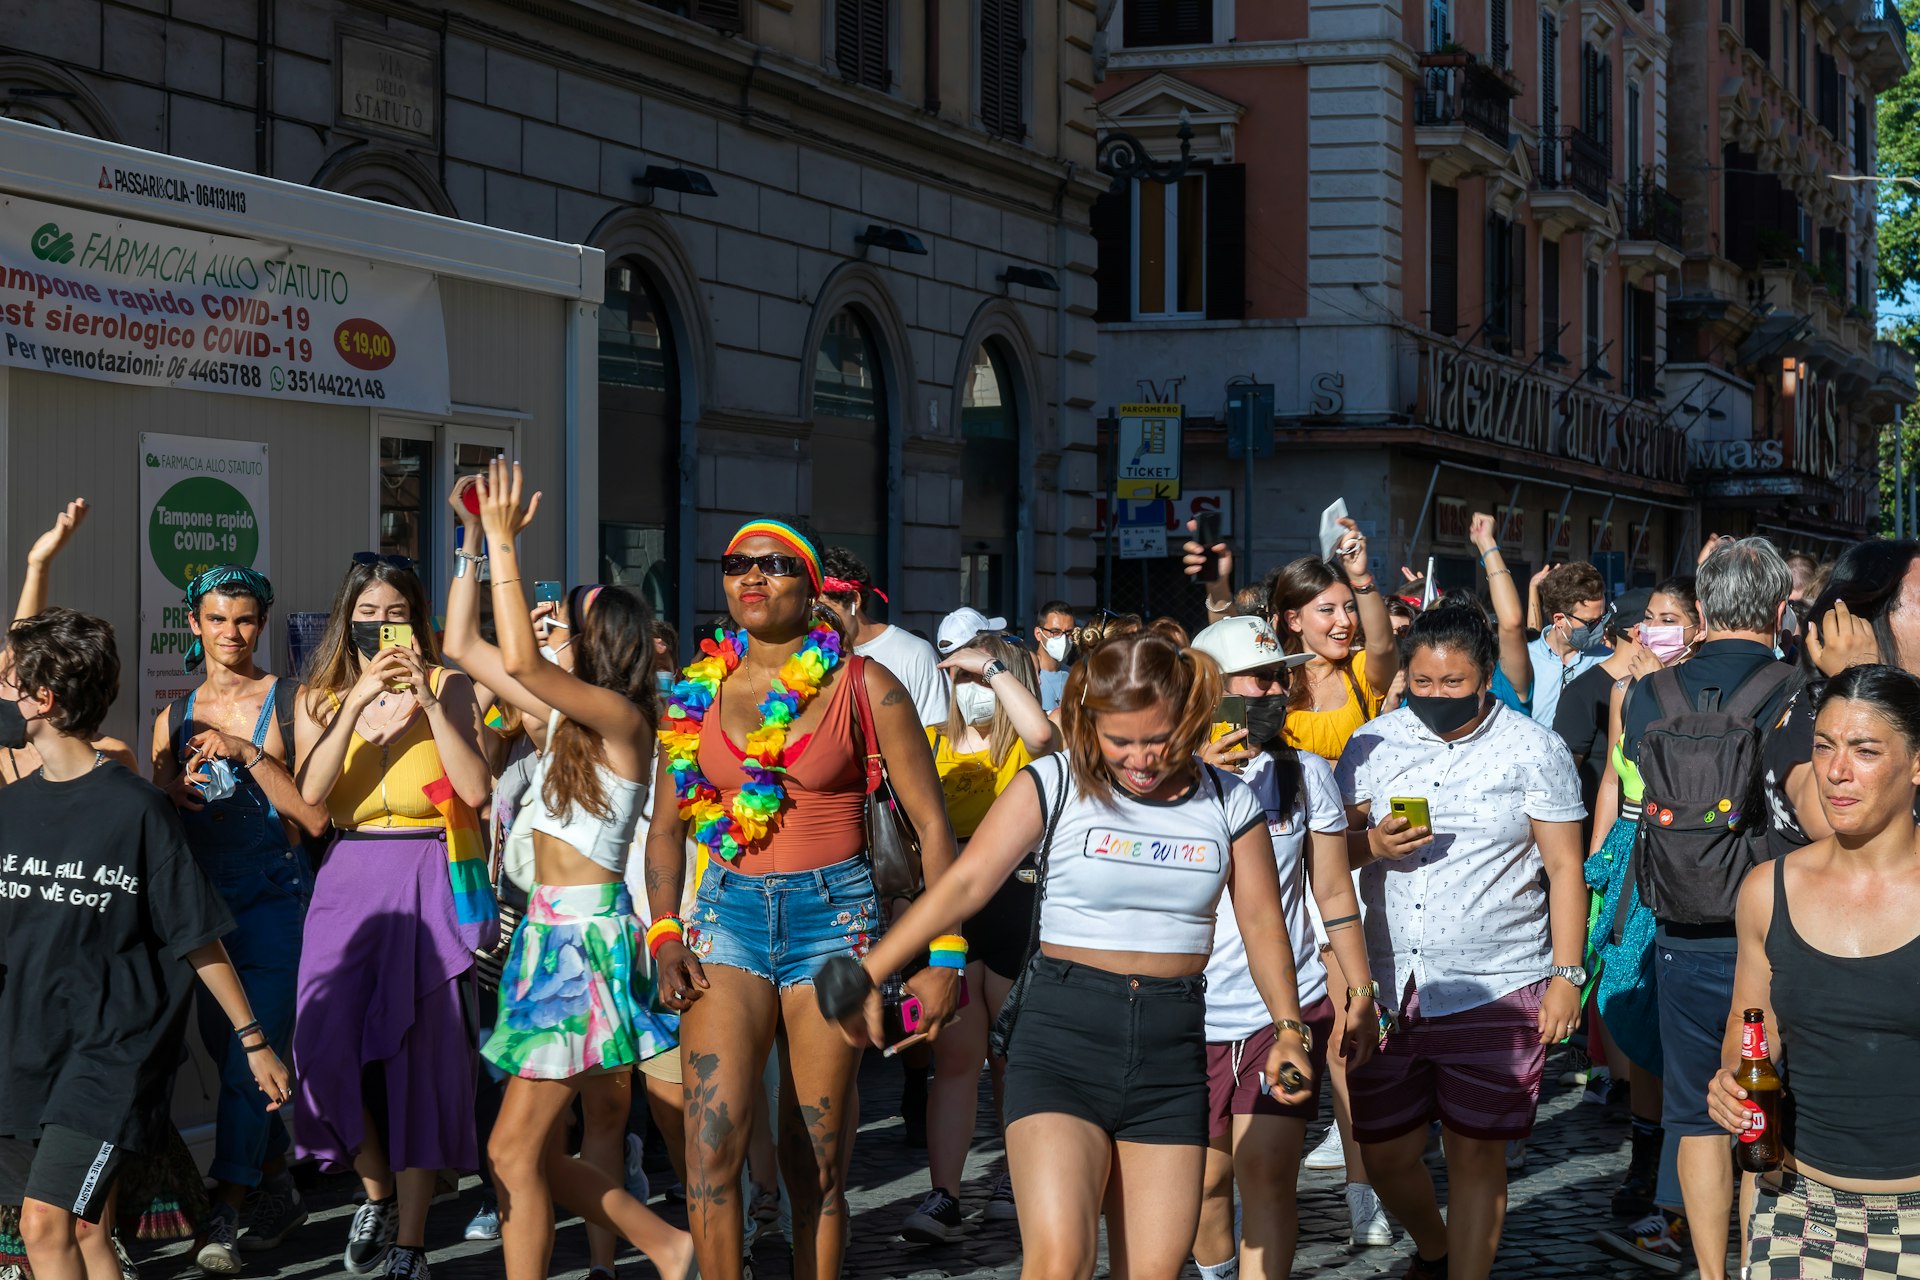 A demonstration for the rights of the LGBTIQ+ community at Rome Pride